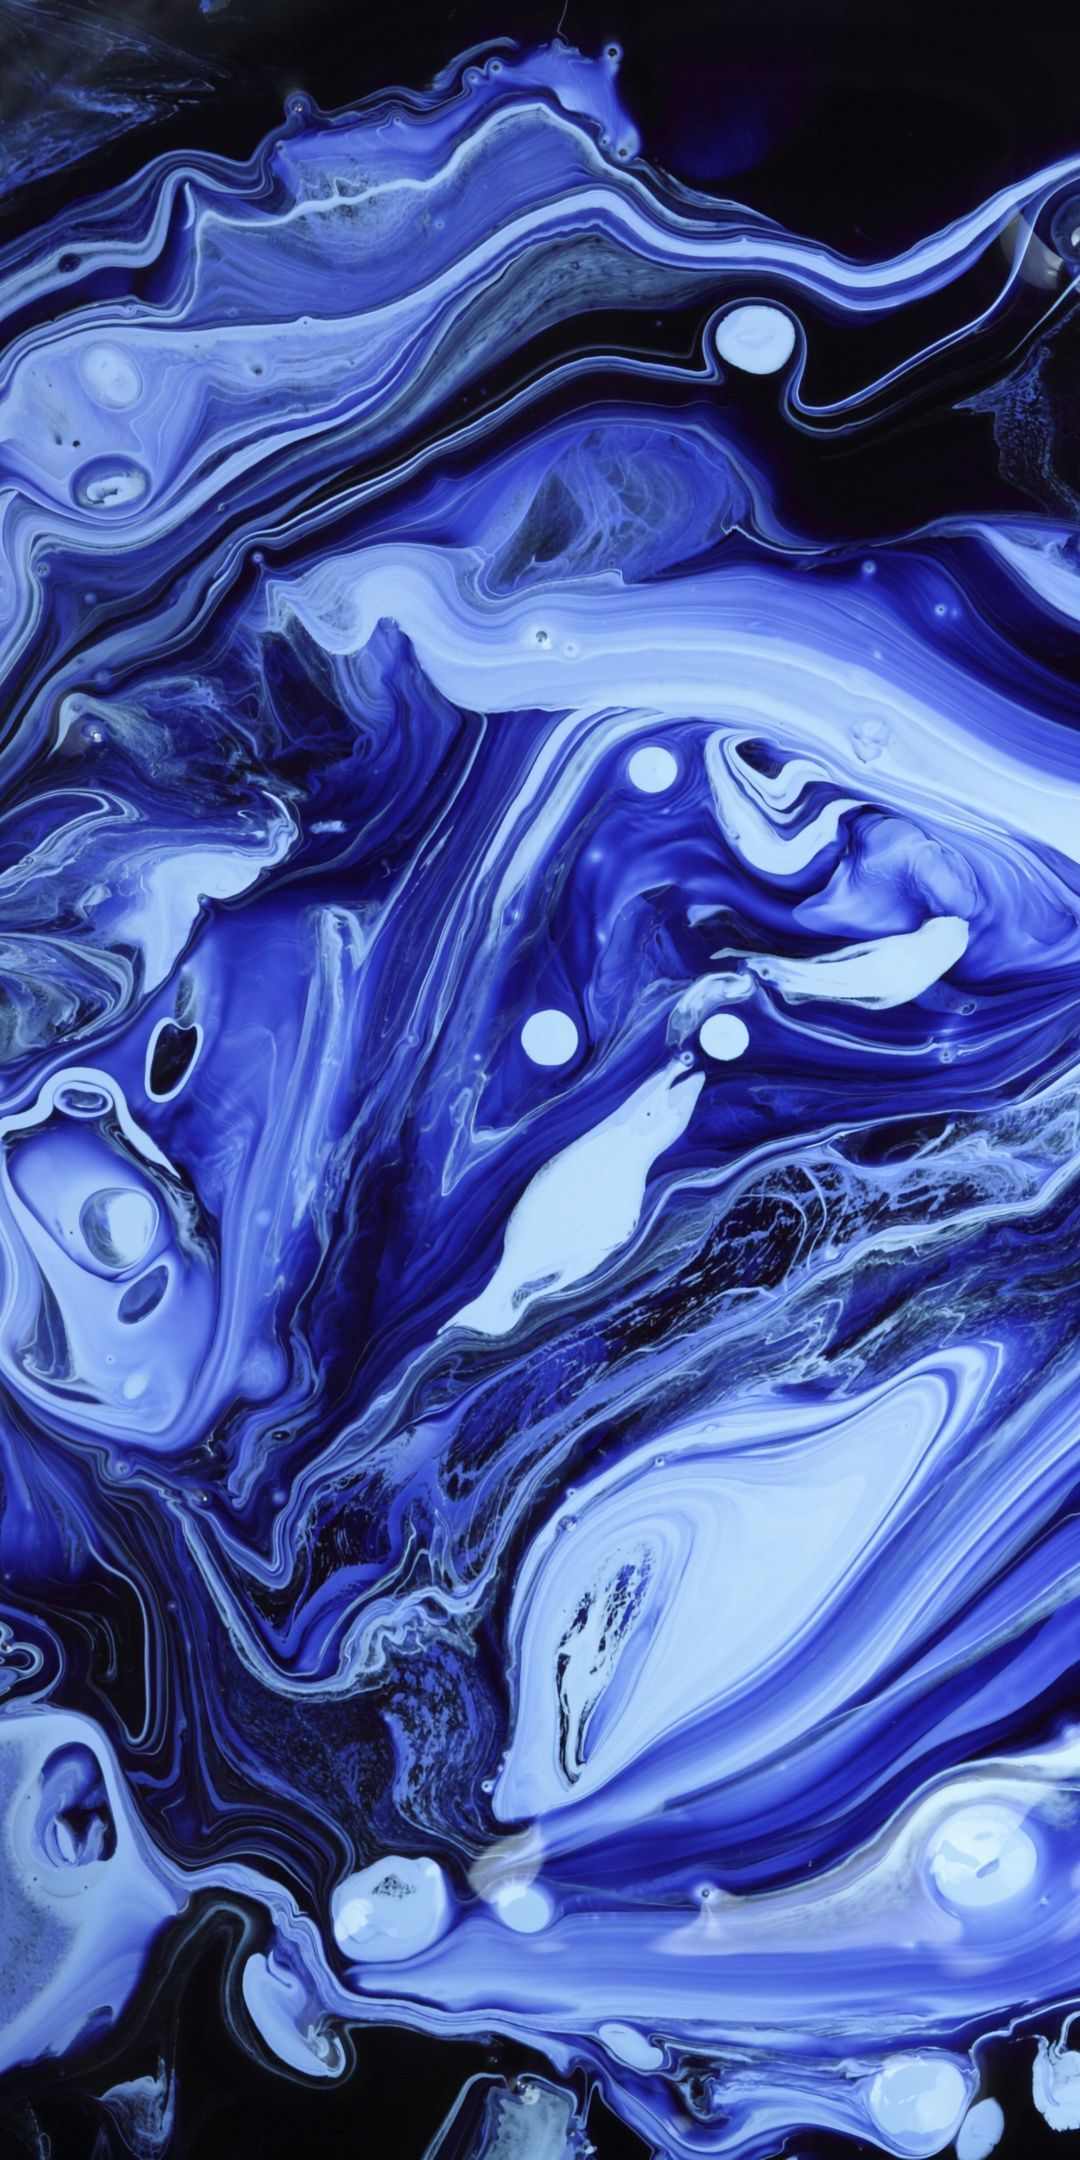 Blue paint, liquids, texture, stains, 1080x2160 wallpaper. Abstract iphone wallpaper, iPhone background wallpaper, Painting wallpaper